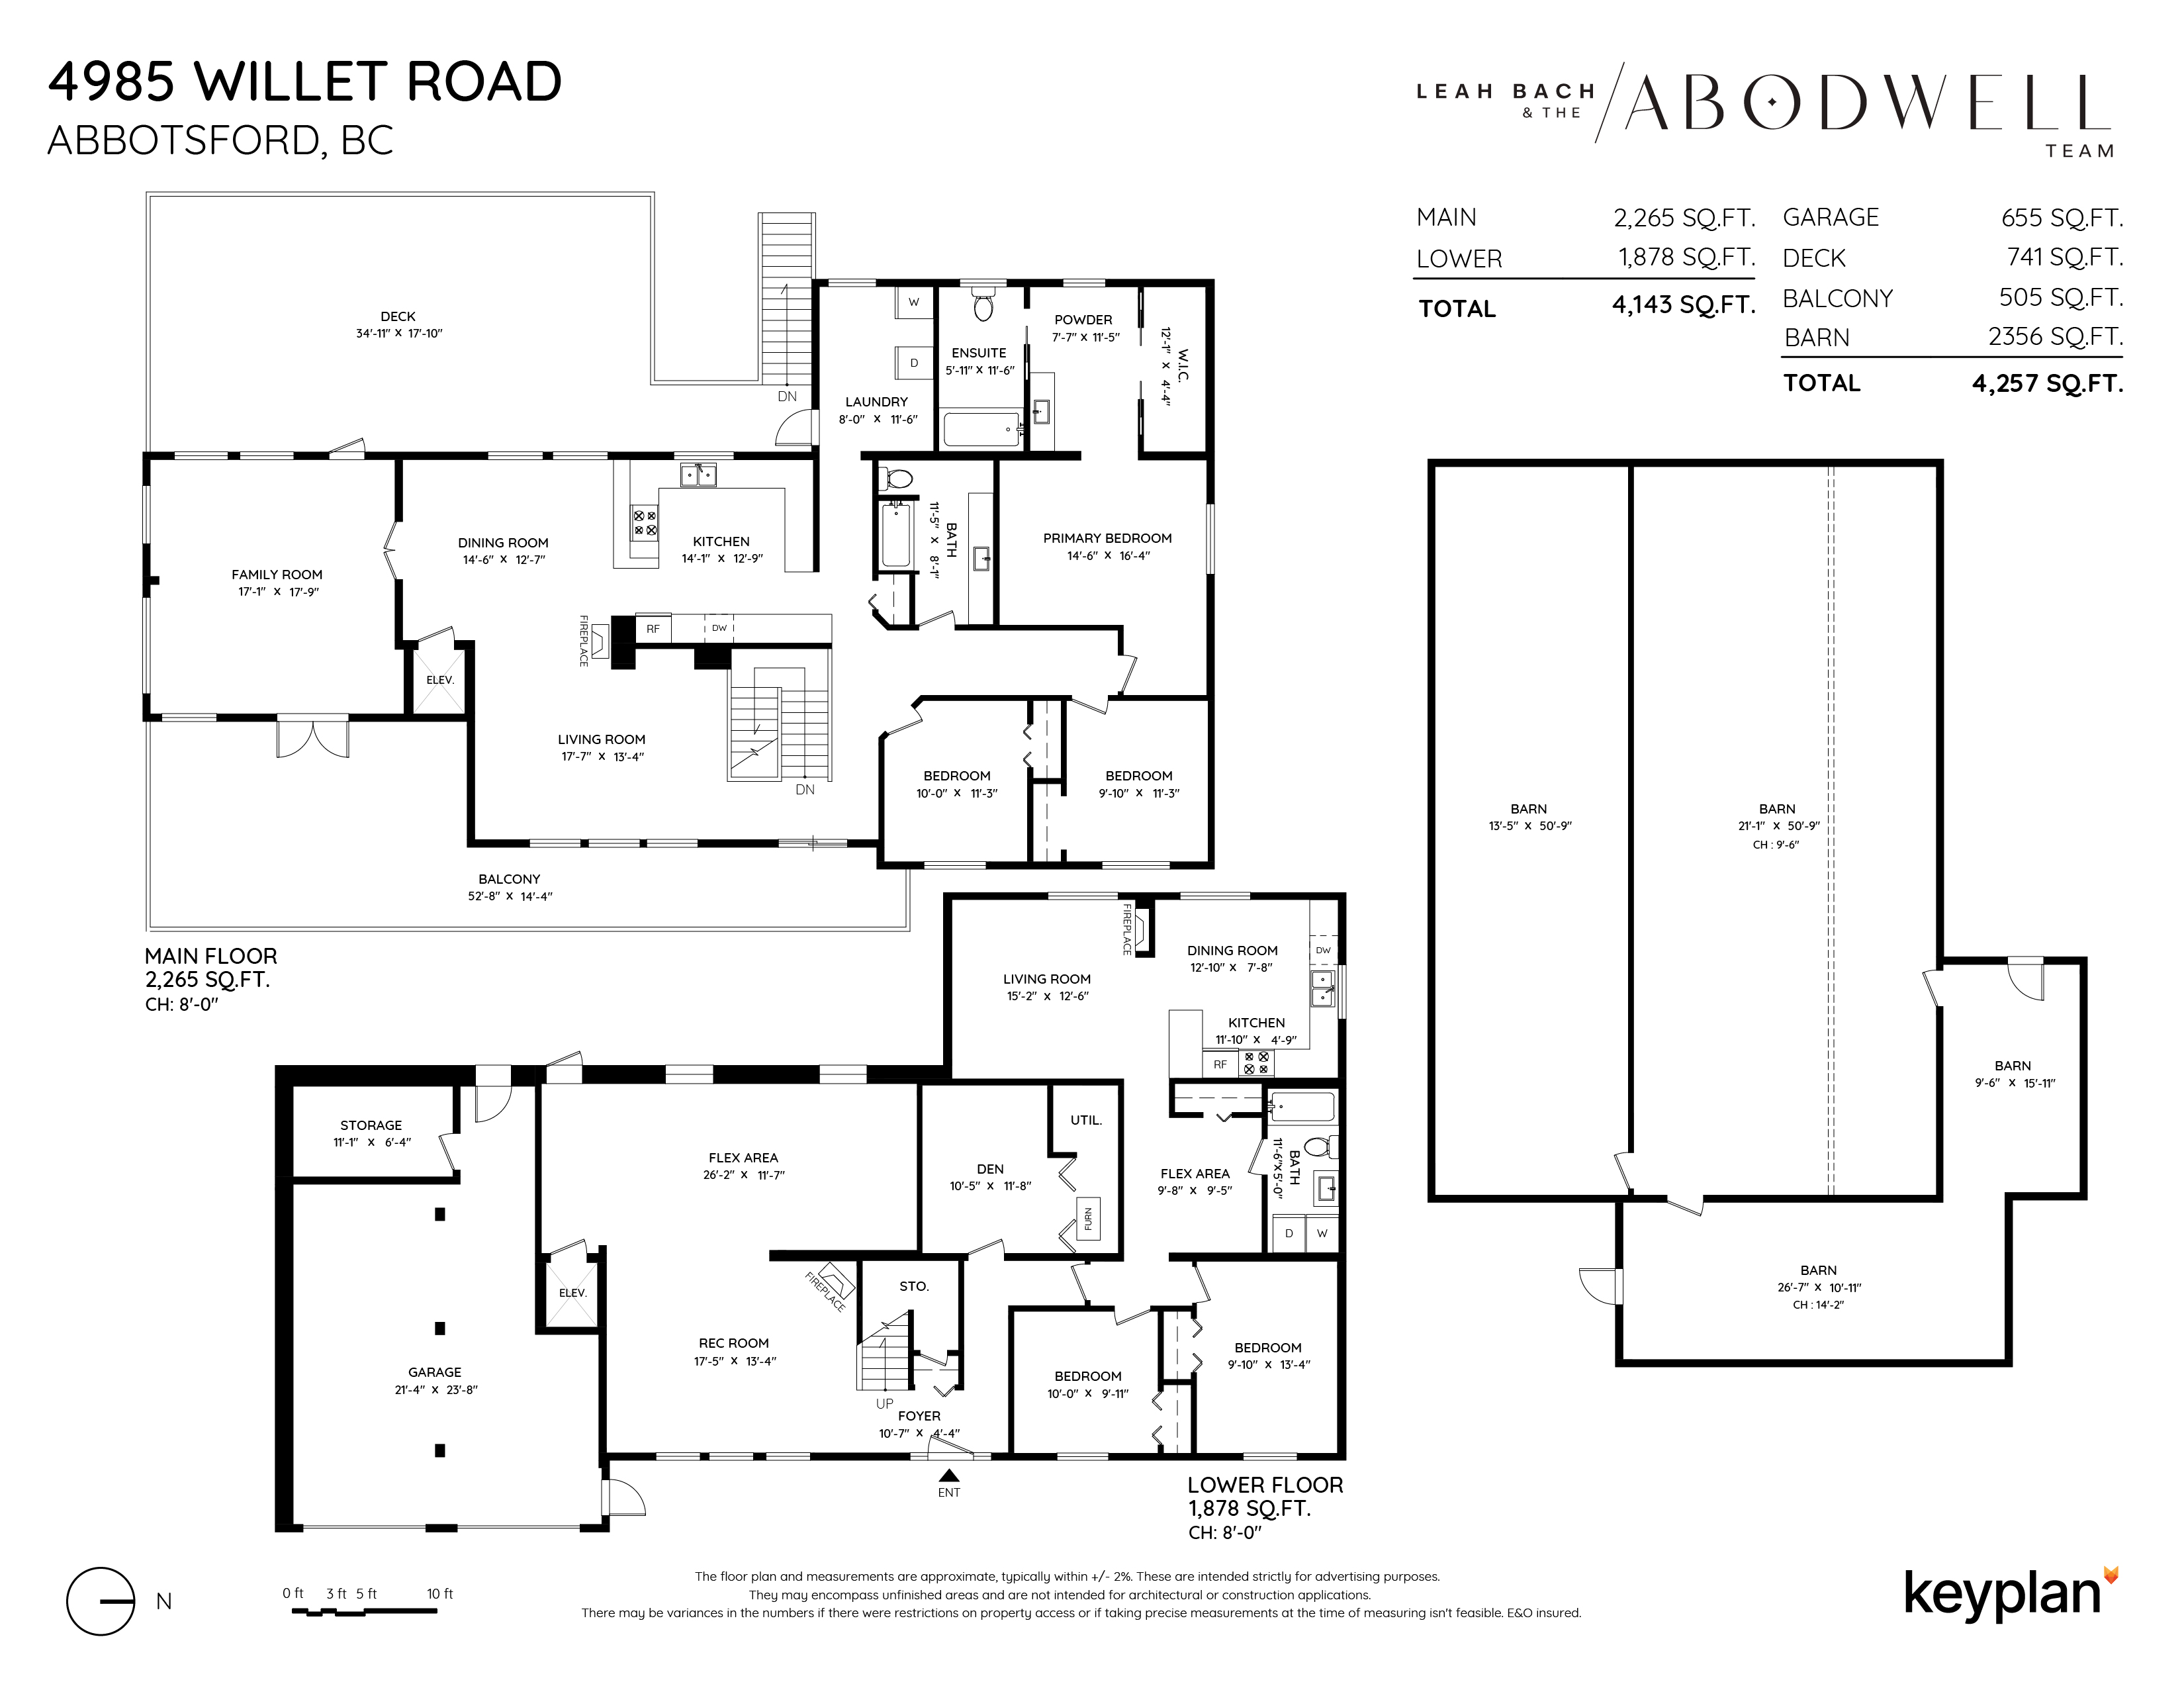 Leah Bach & The Abodwell Team - 4985 Willet Road, Abbotsford, BC, Canada | Floor Plan 1